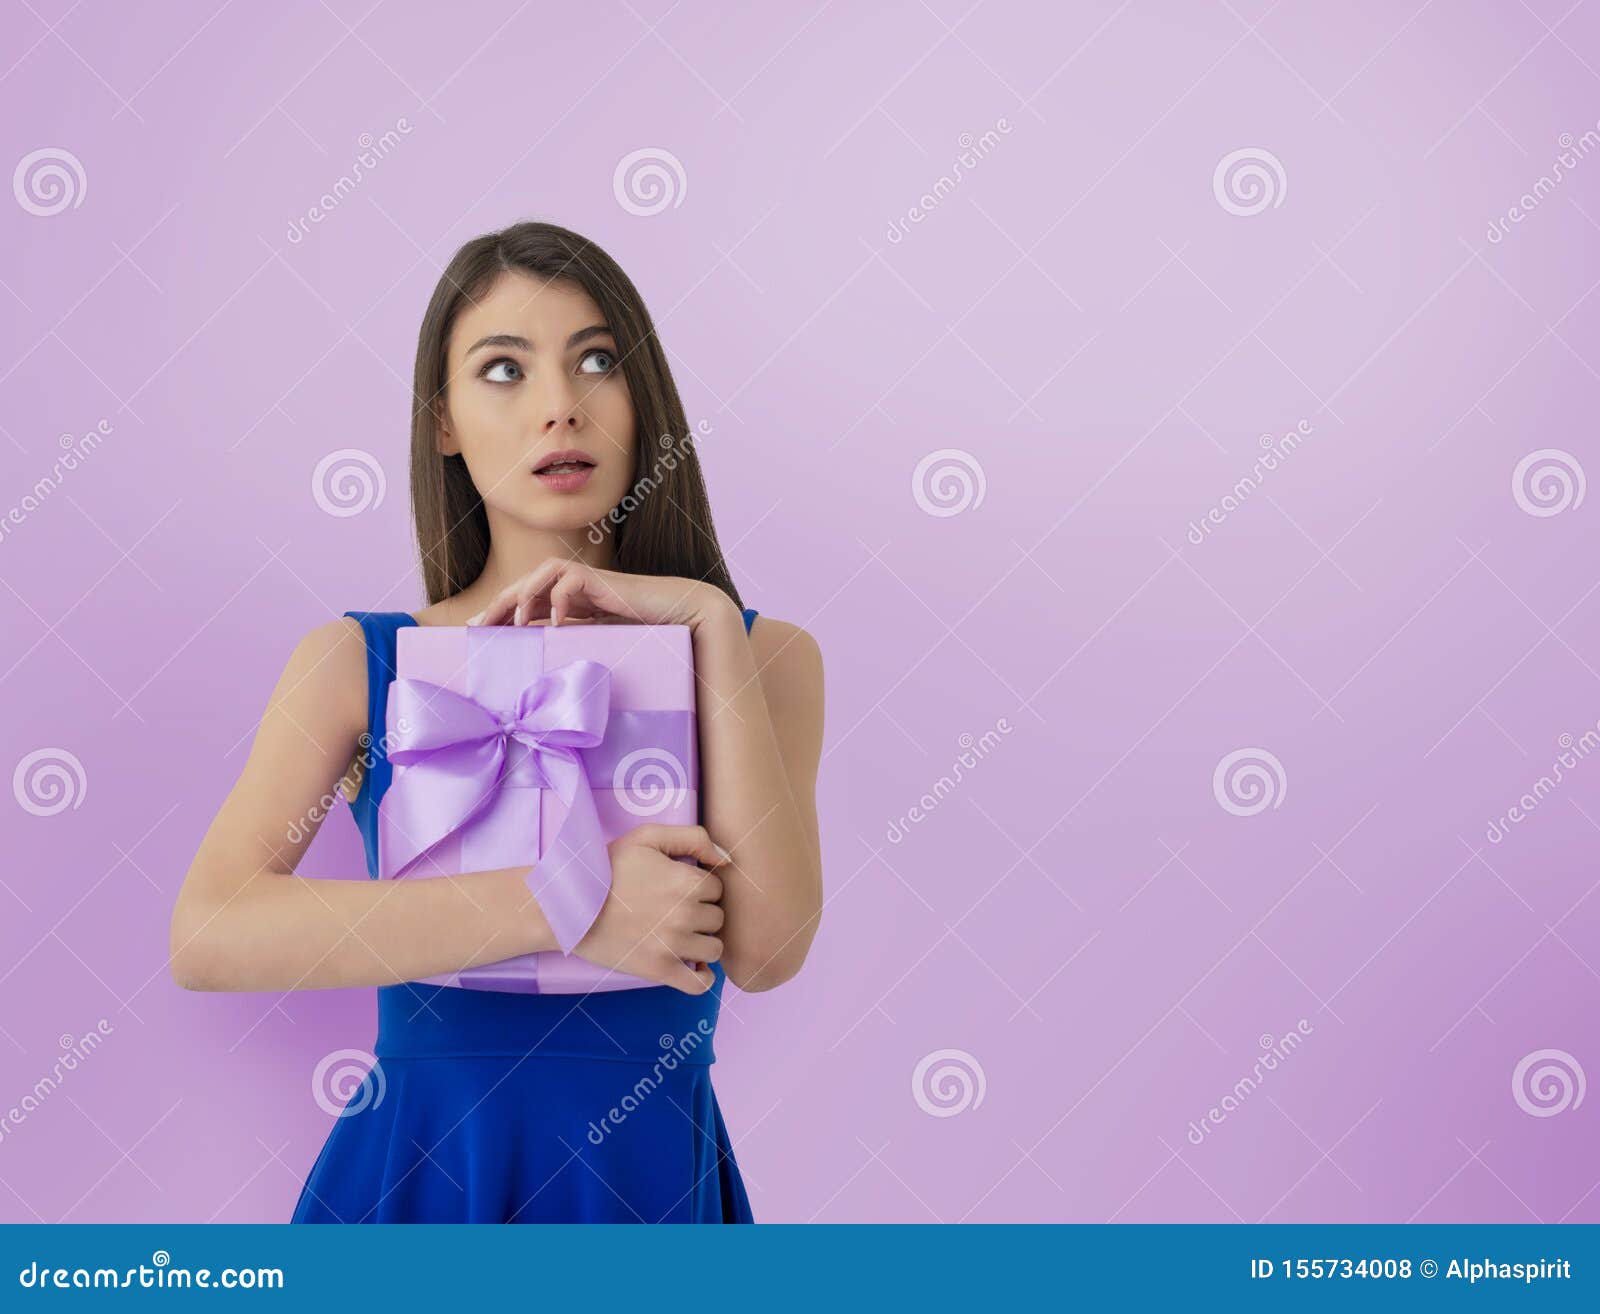 happy woman think about her received present